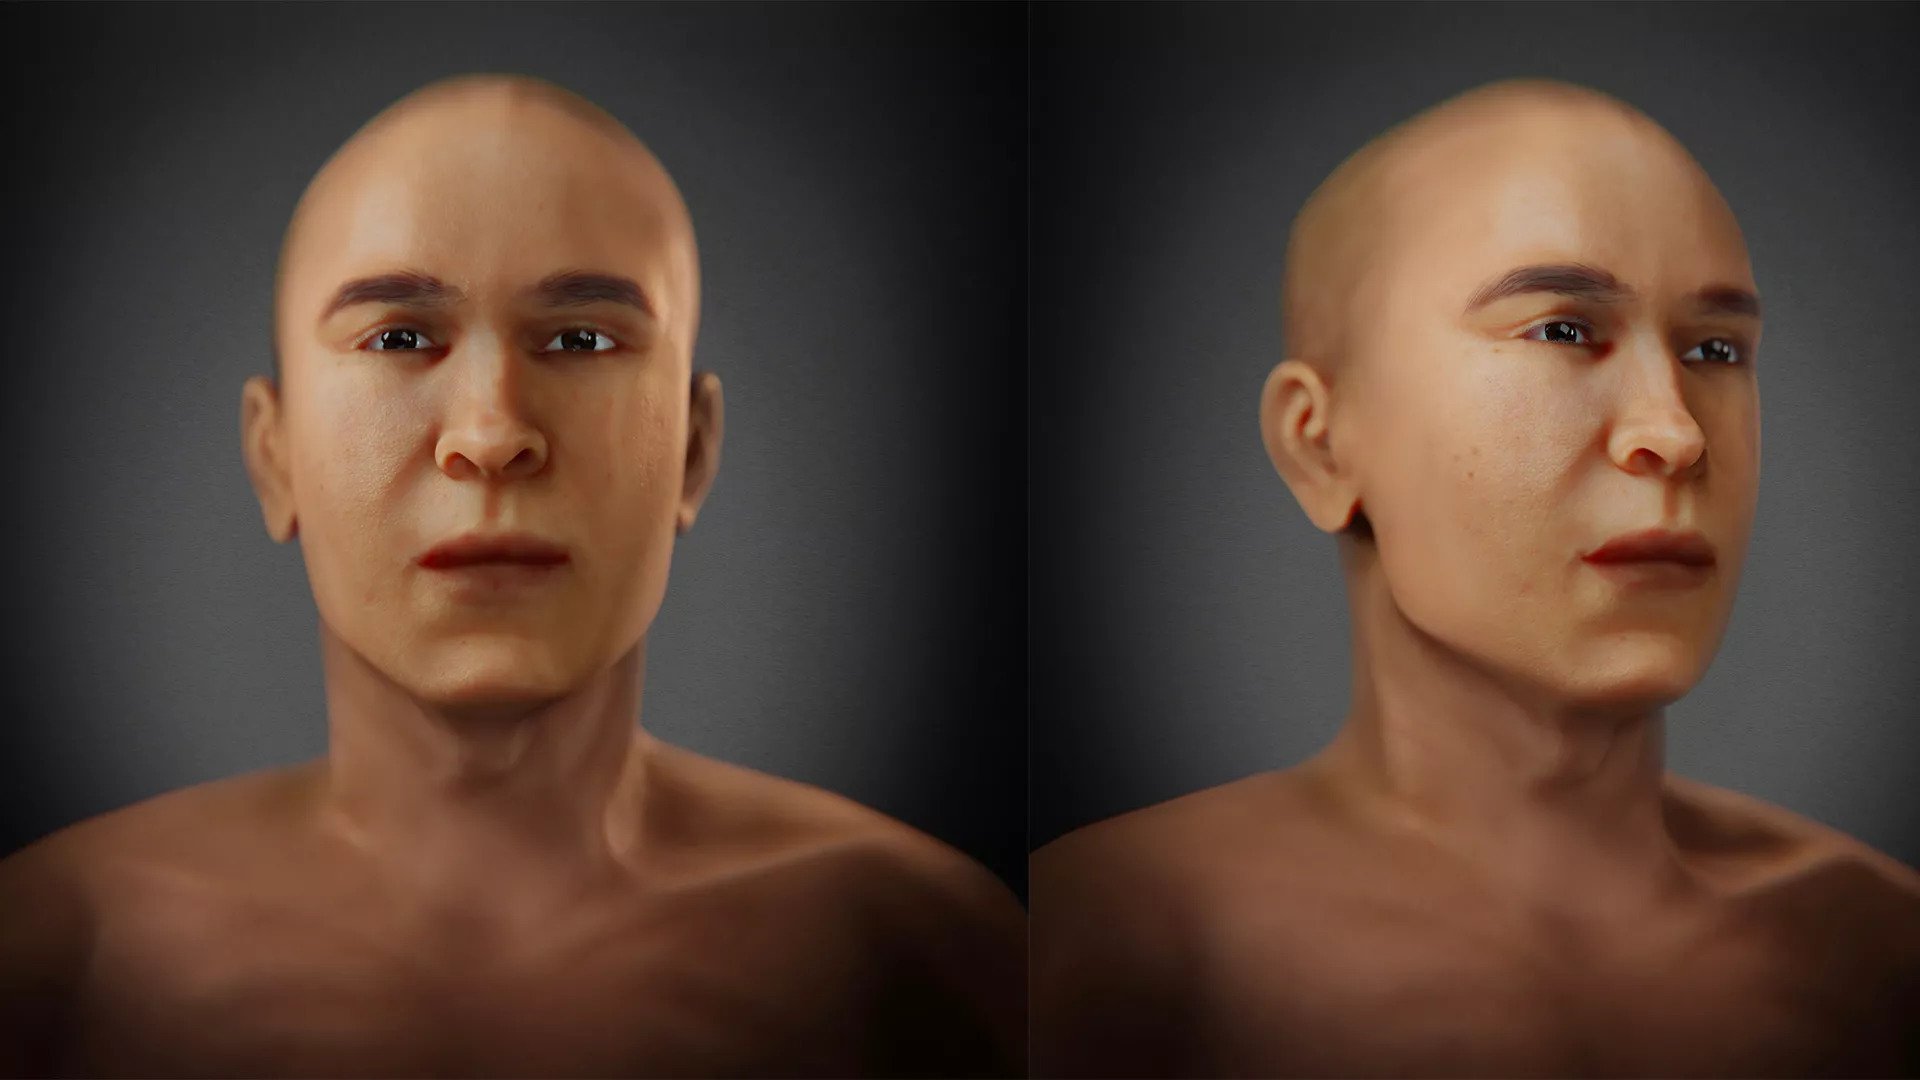 King Tut’s father revealed in stunning facial reconstruction